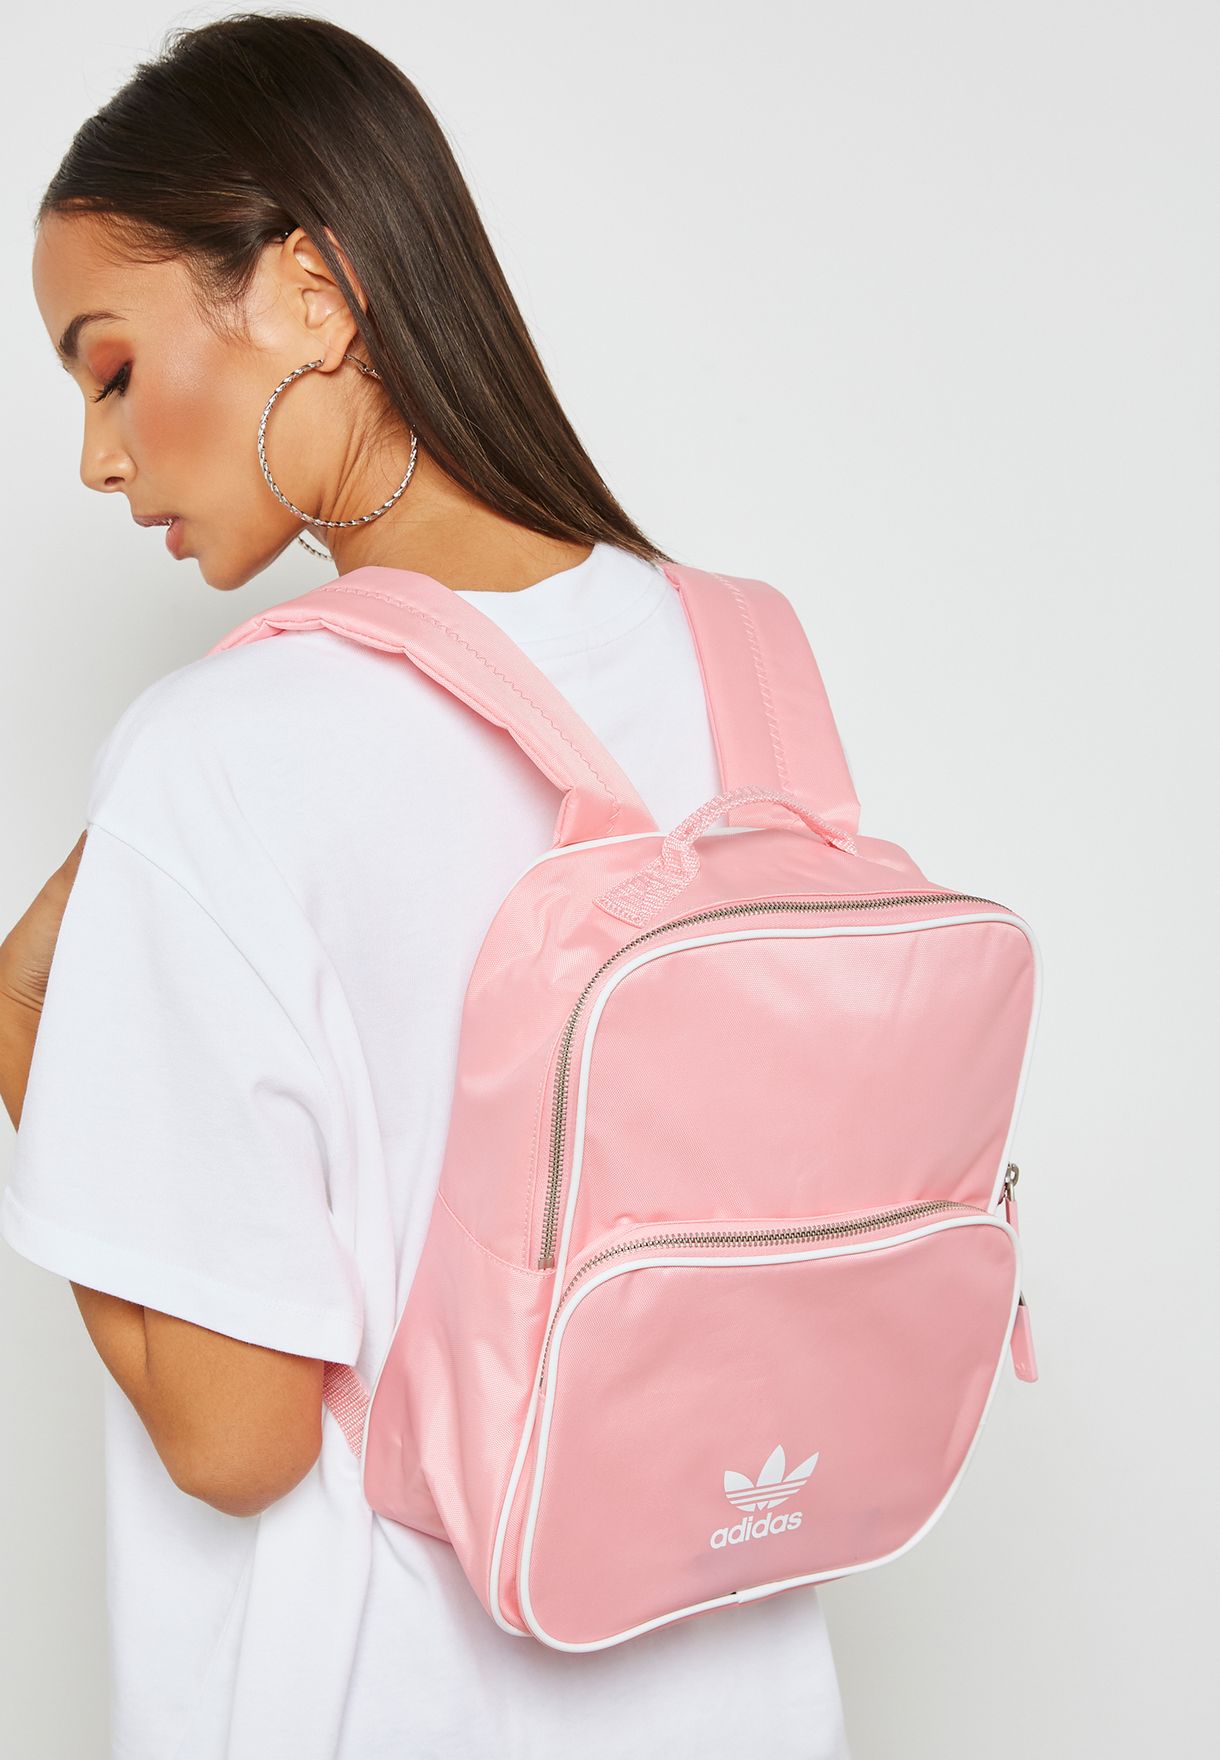 adicolor classic backpack pink